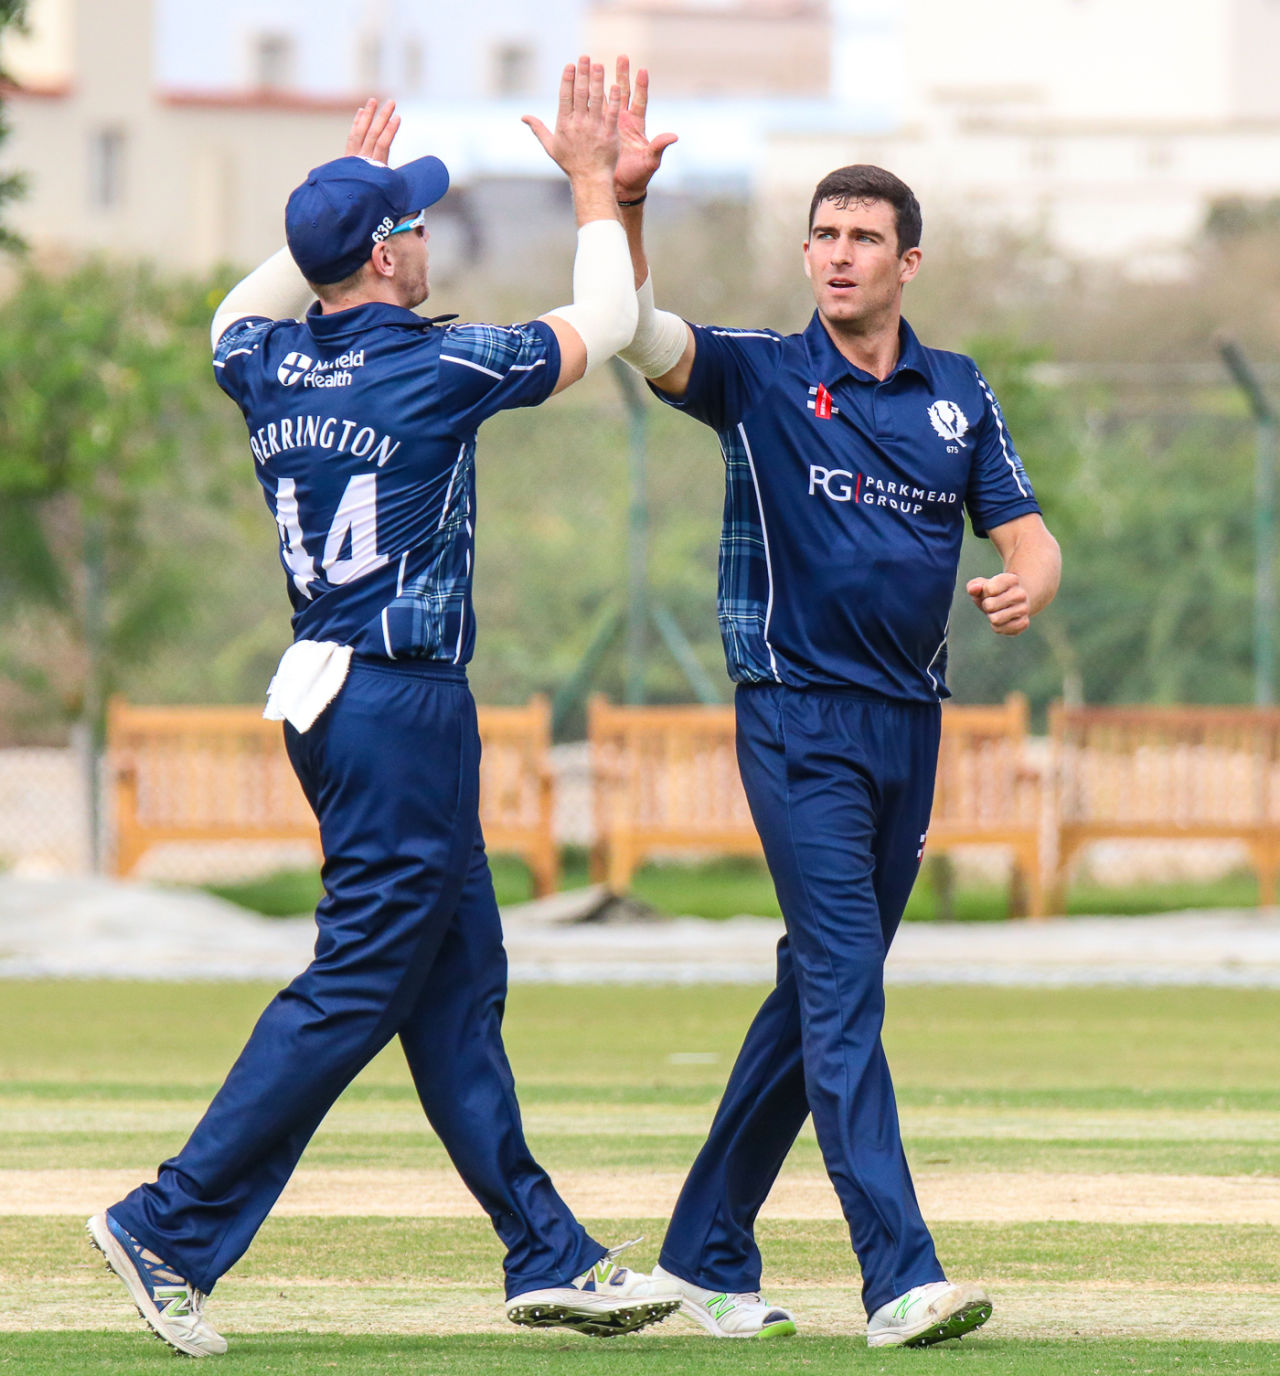 Ruaidhri Smith gets a high five after taking another wicket, Oman v Scotland, Al Amerat, February 19, 2019